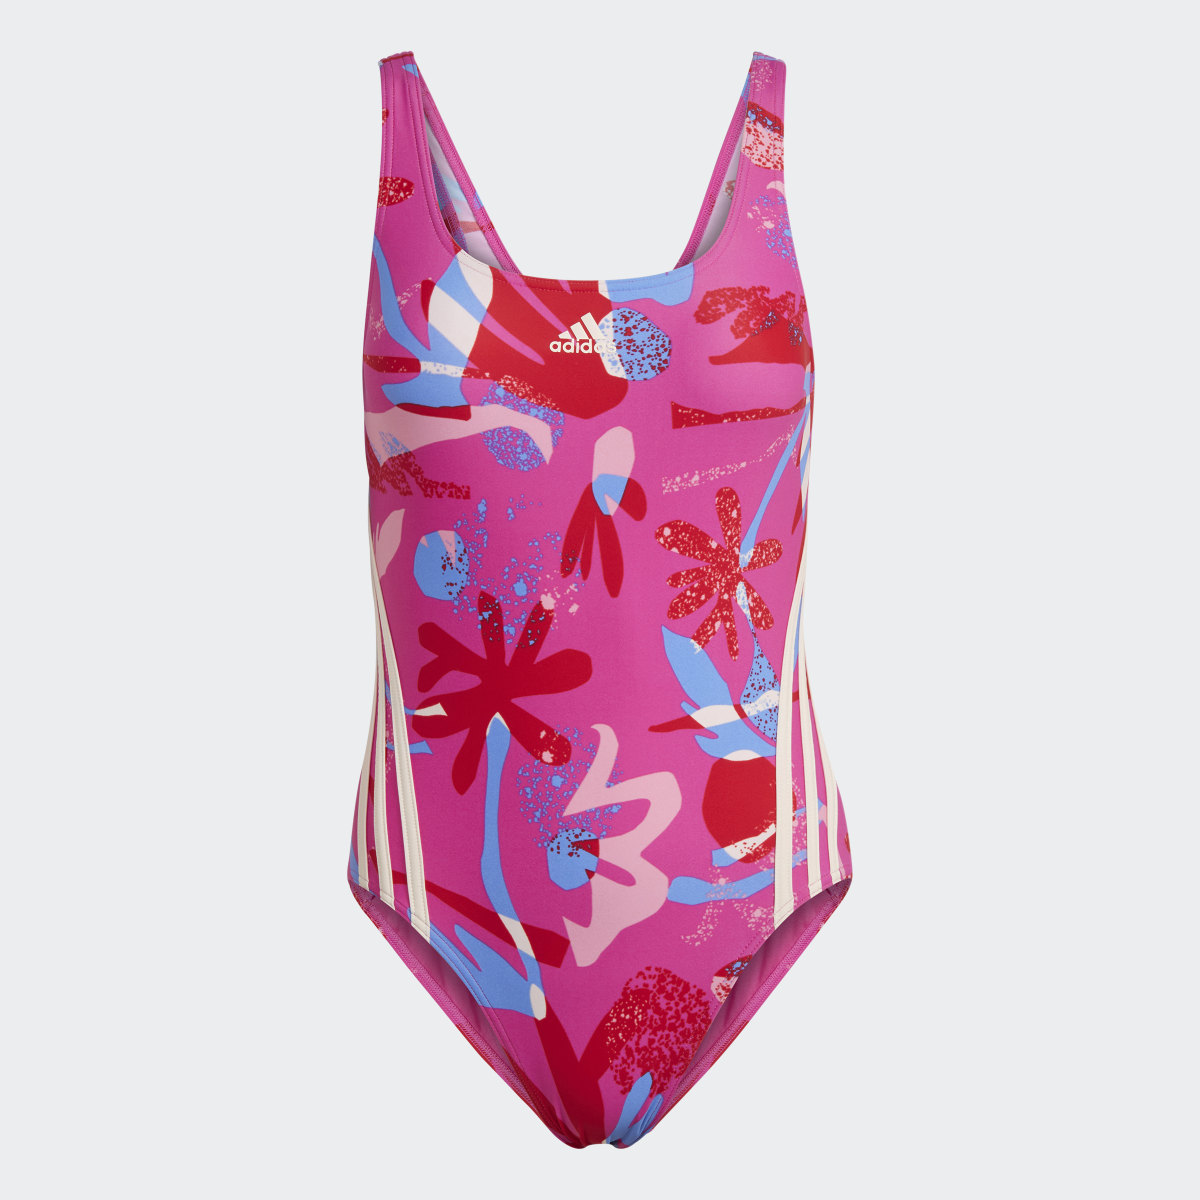 Adidas Floral 3-Stripes Swimsuit. 6